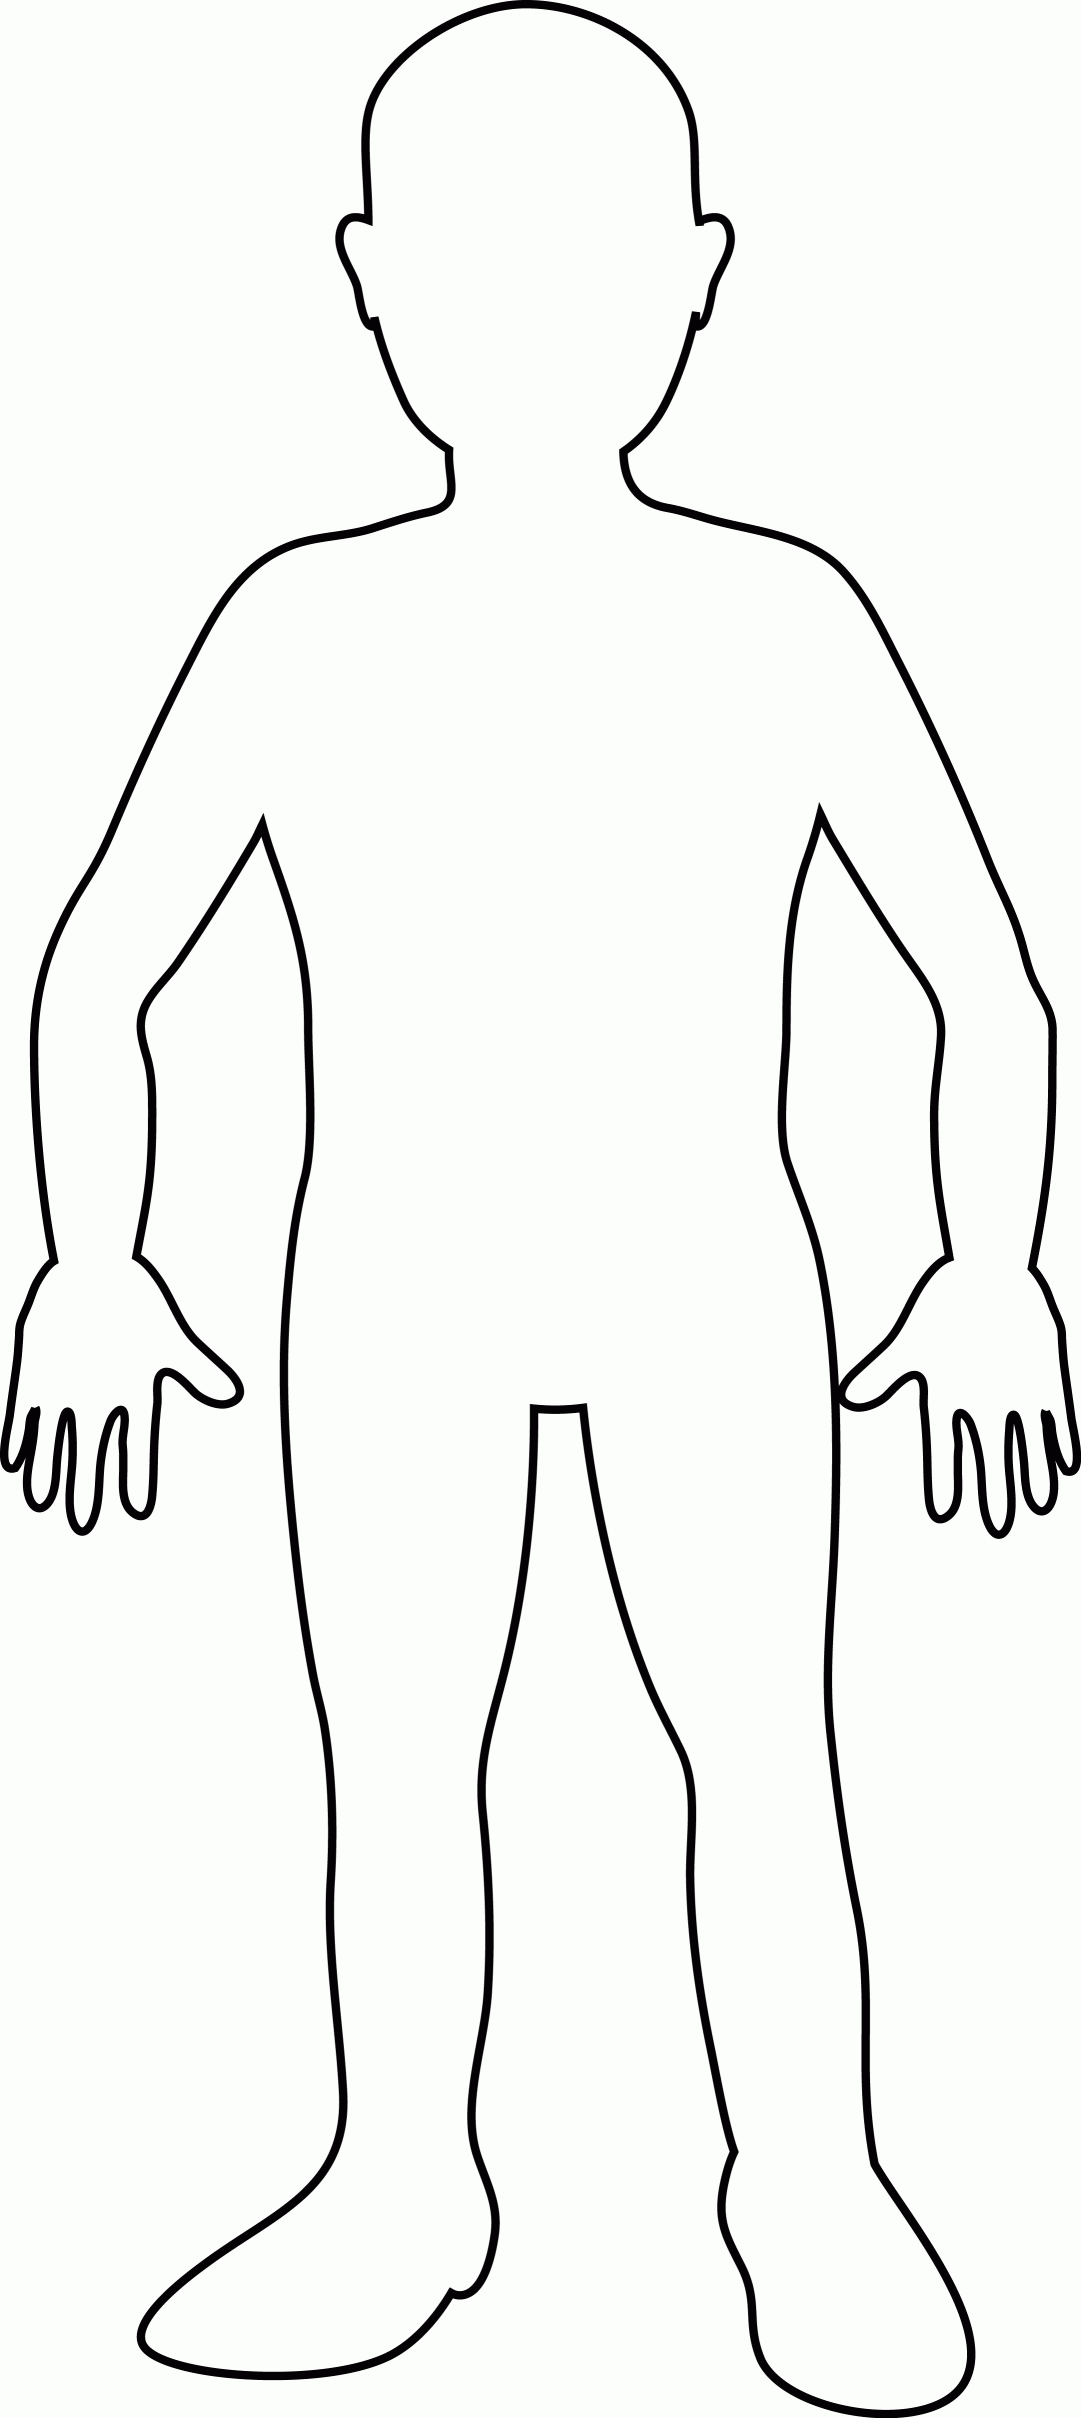 Outline Of Person Coloring Page